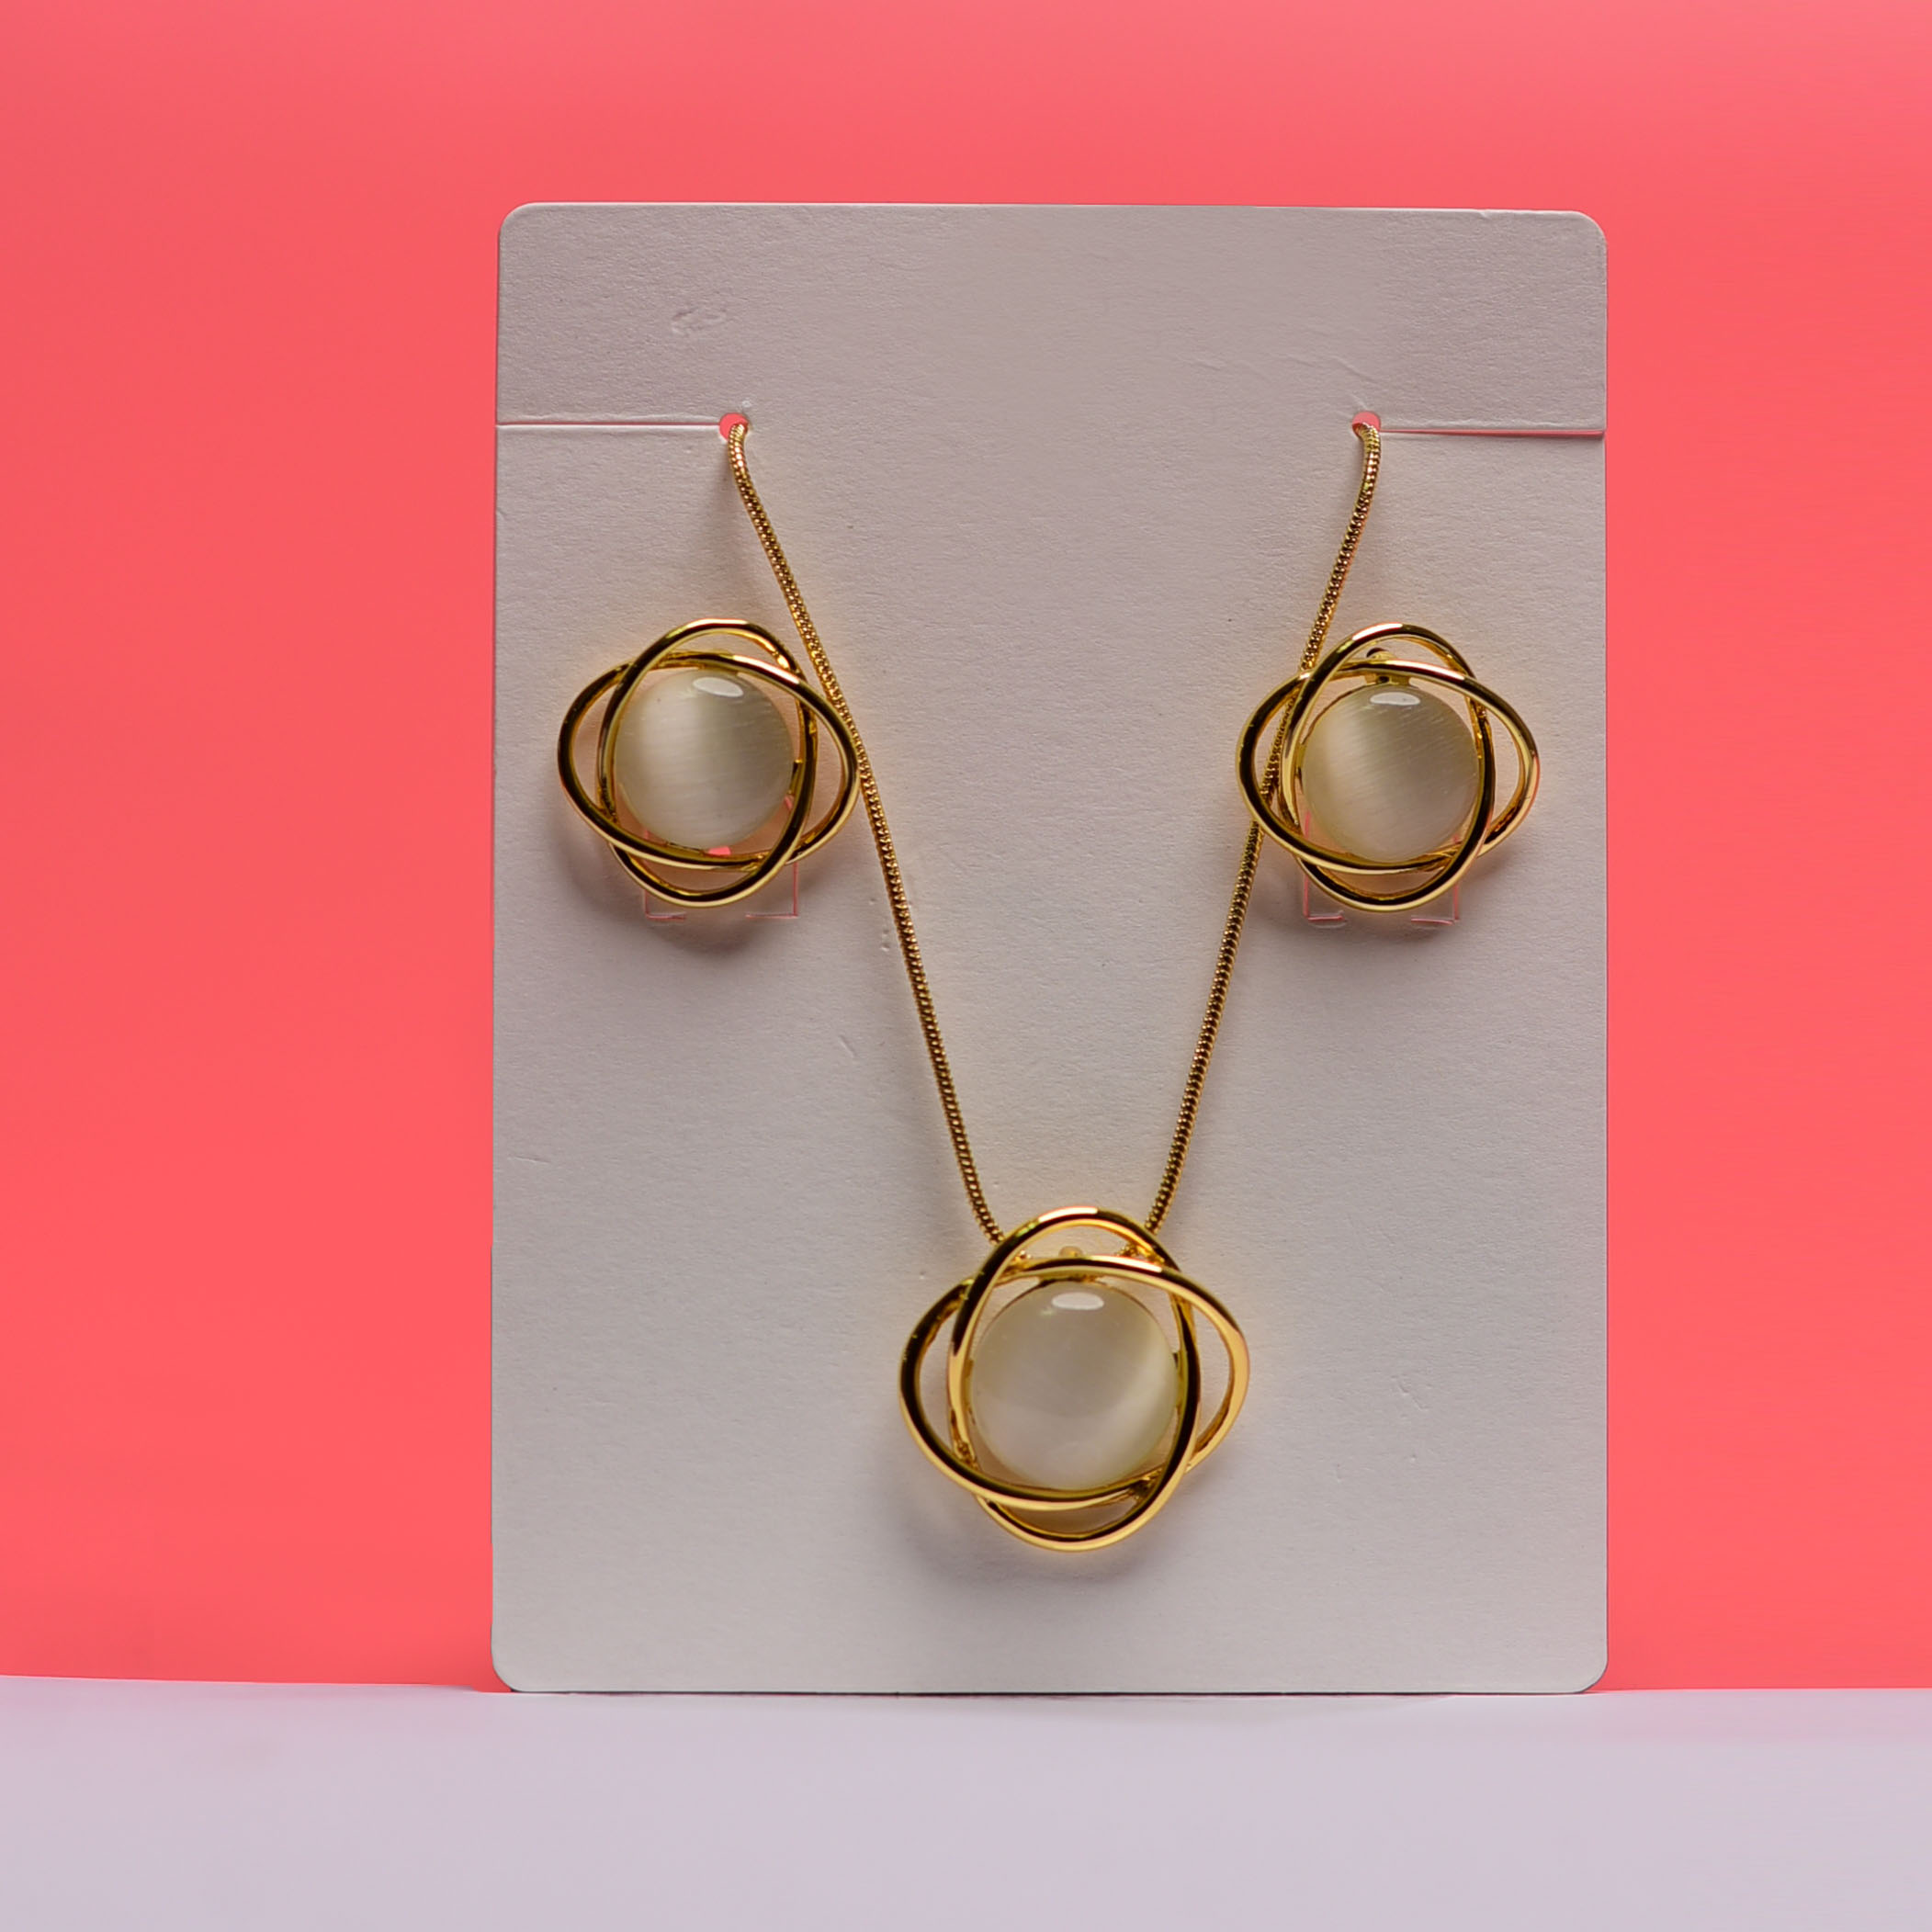 Gold, necklace / earrings sets